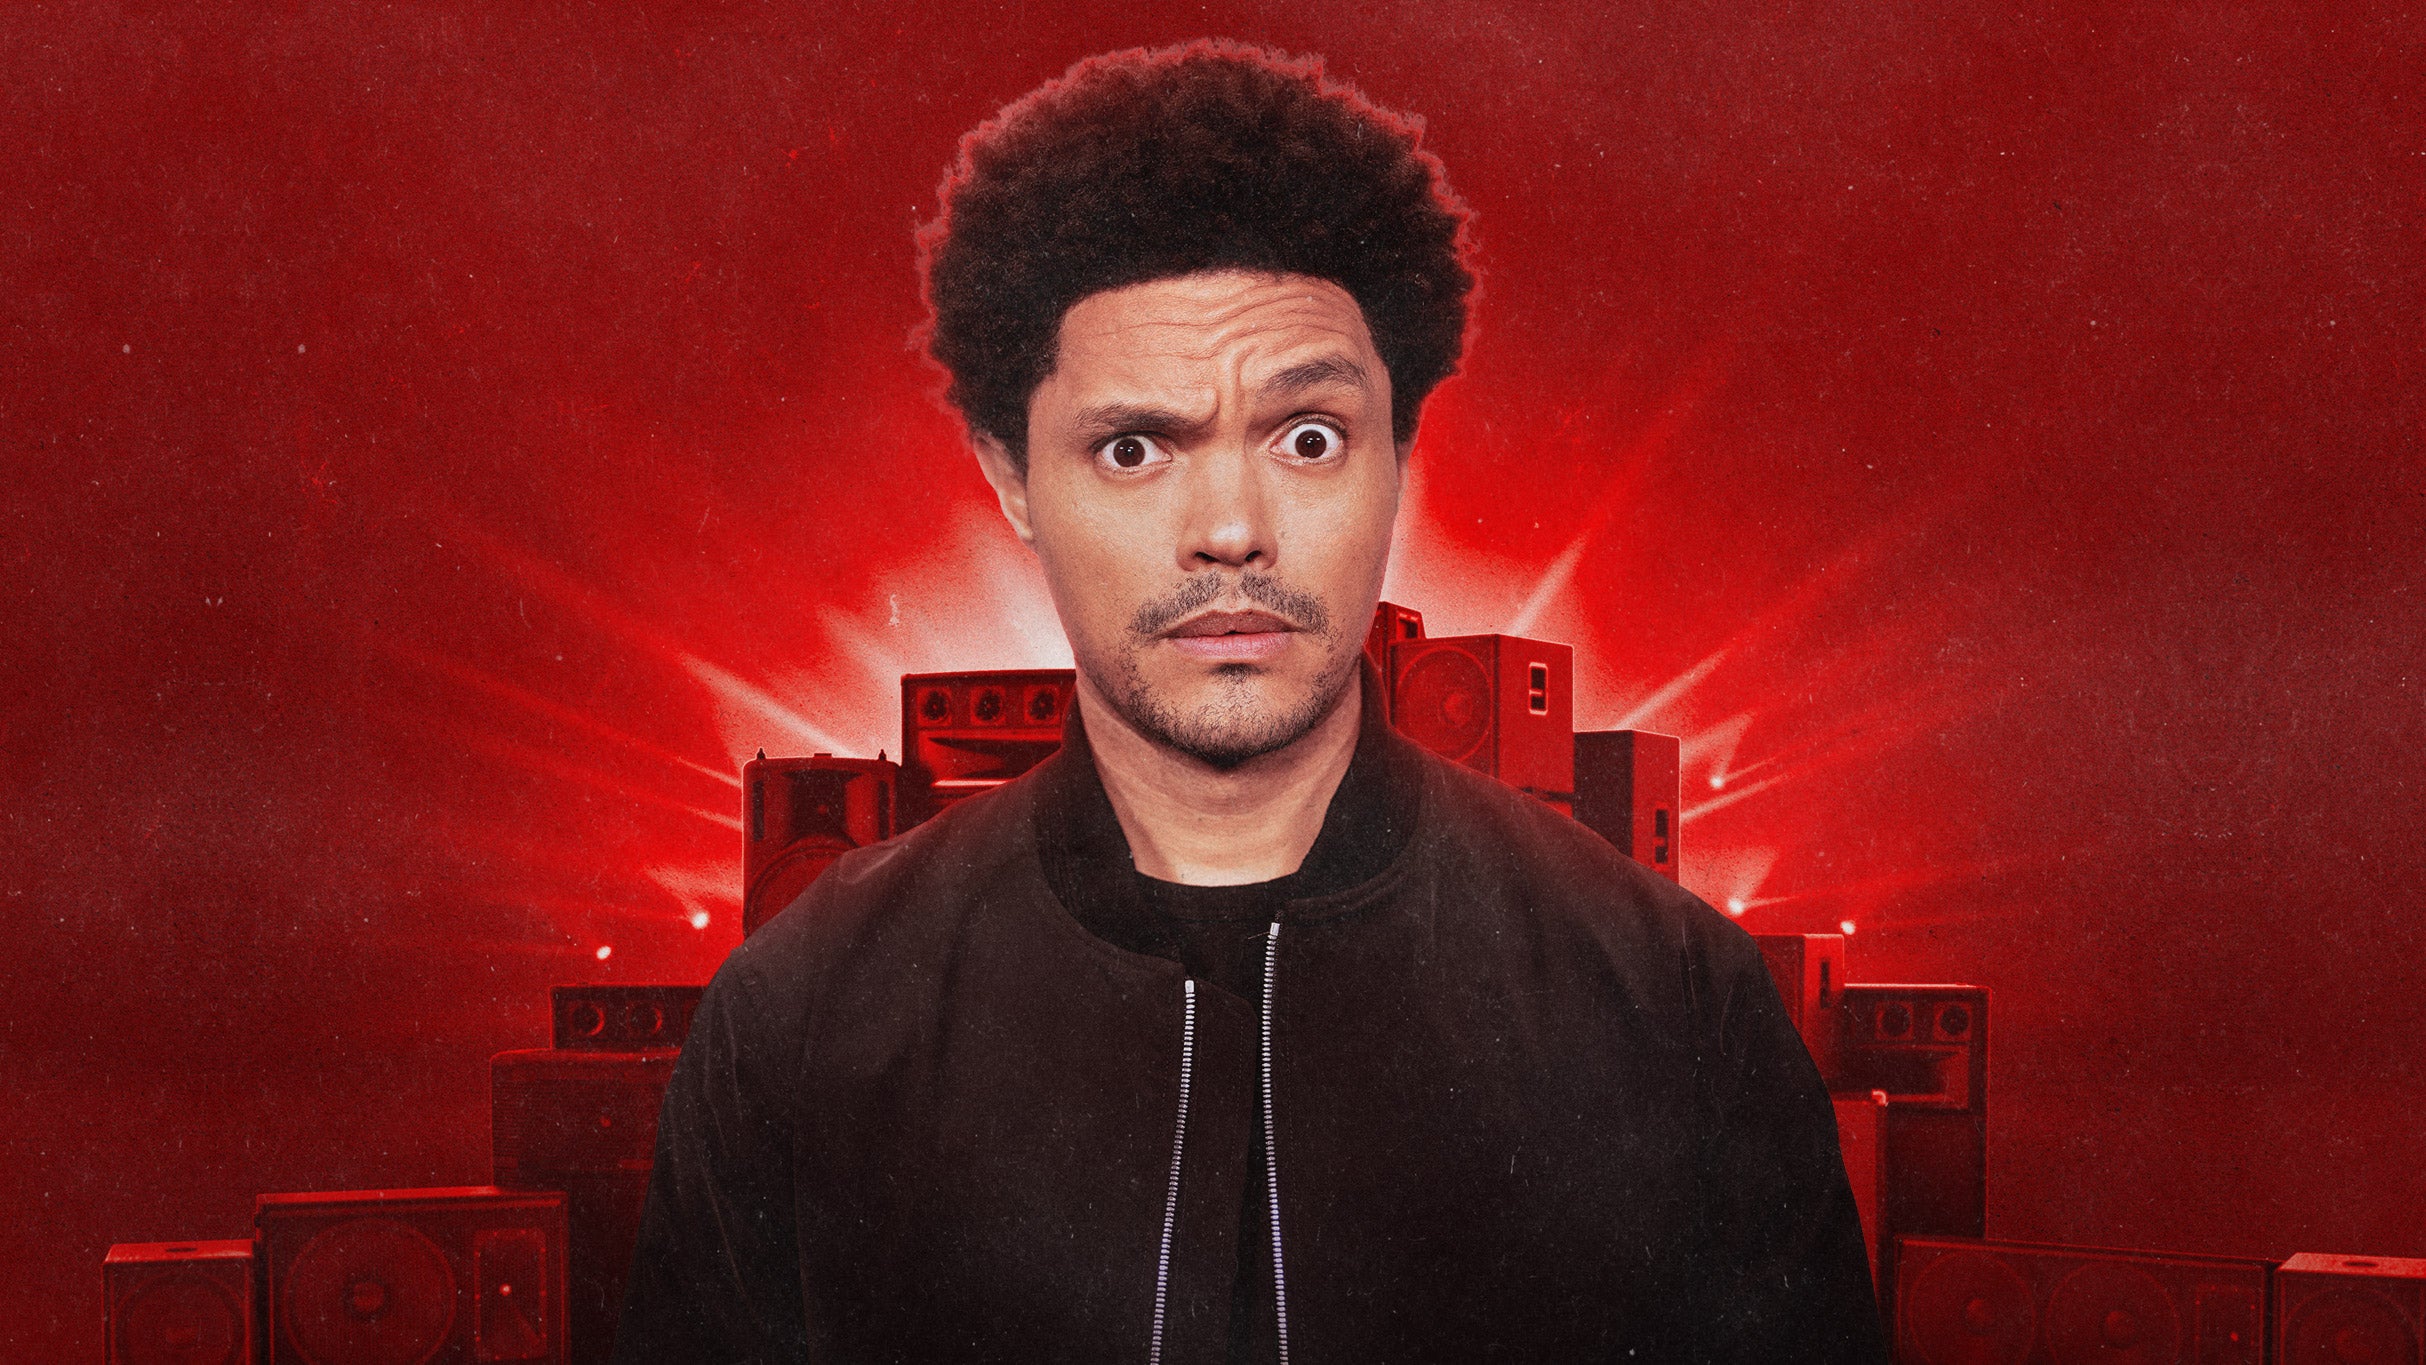 Trevor Noah: Off The Record free presale password for early tickets in Detroit